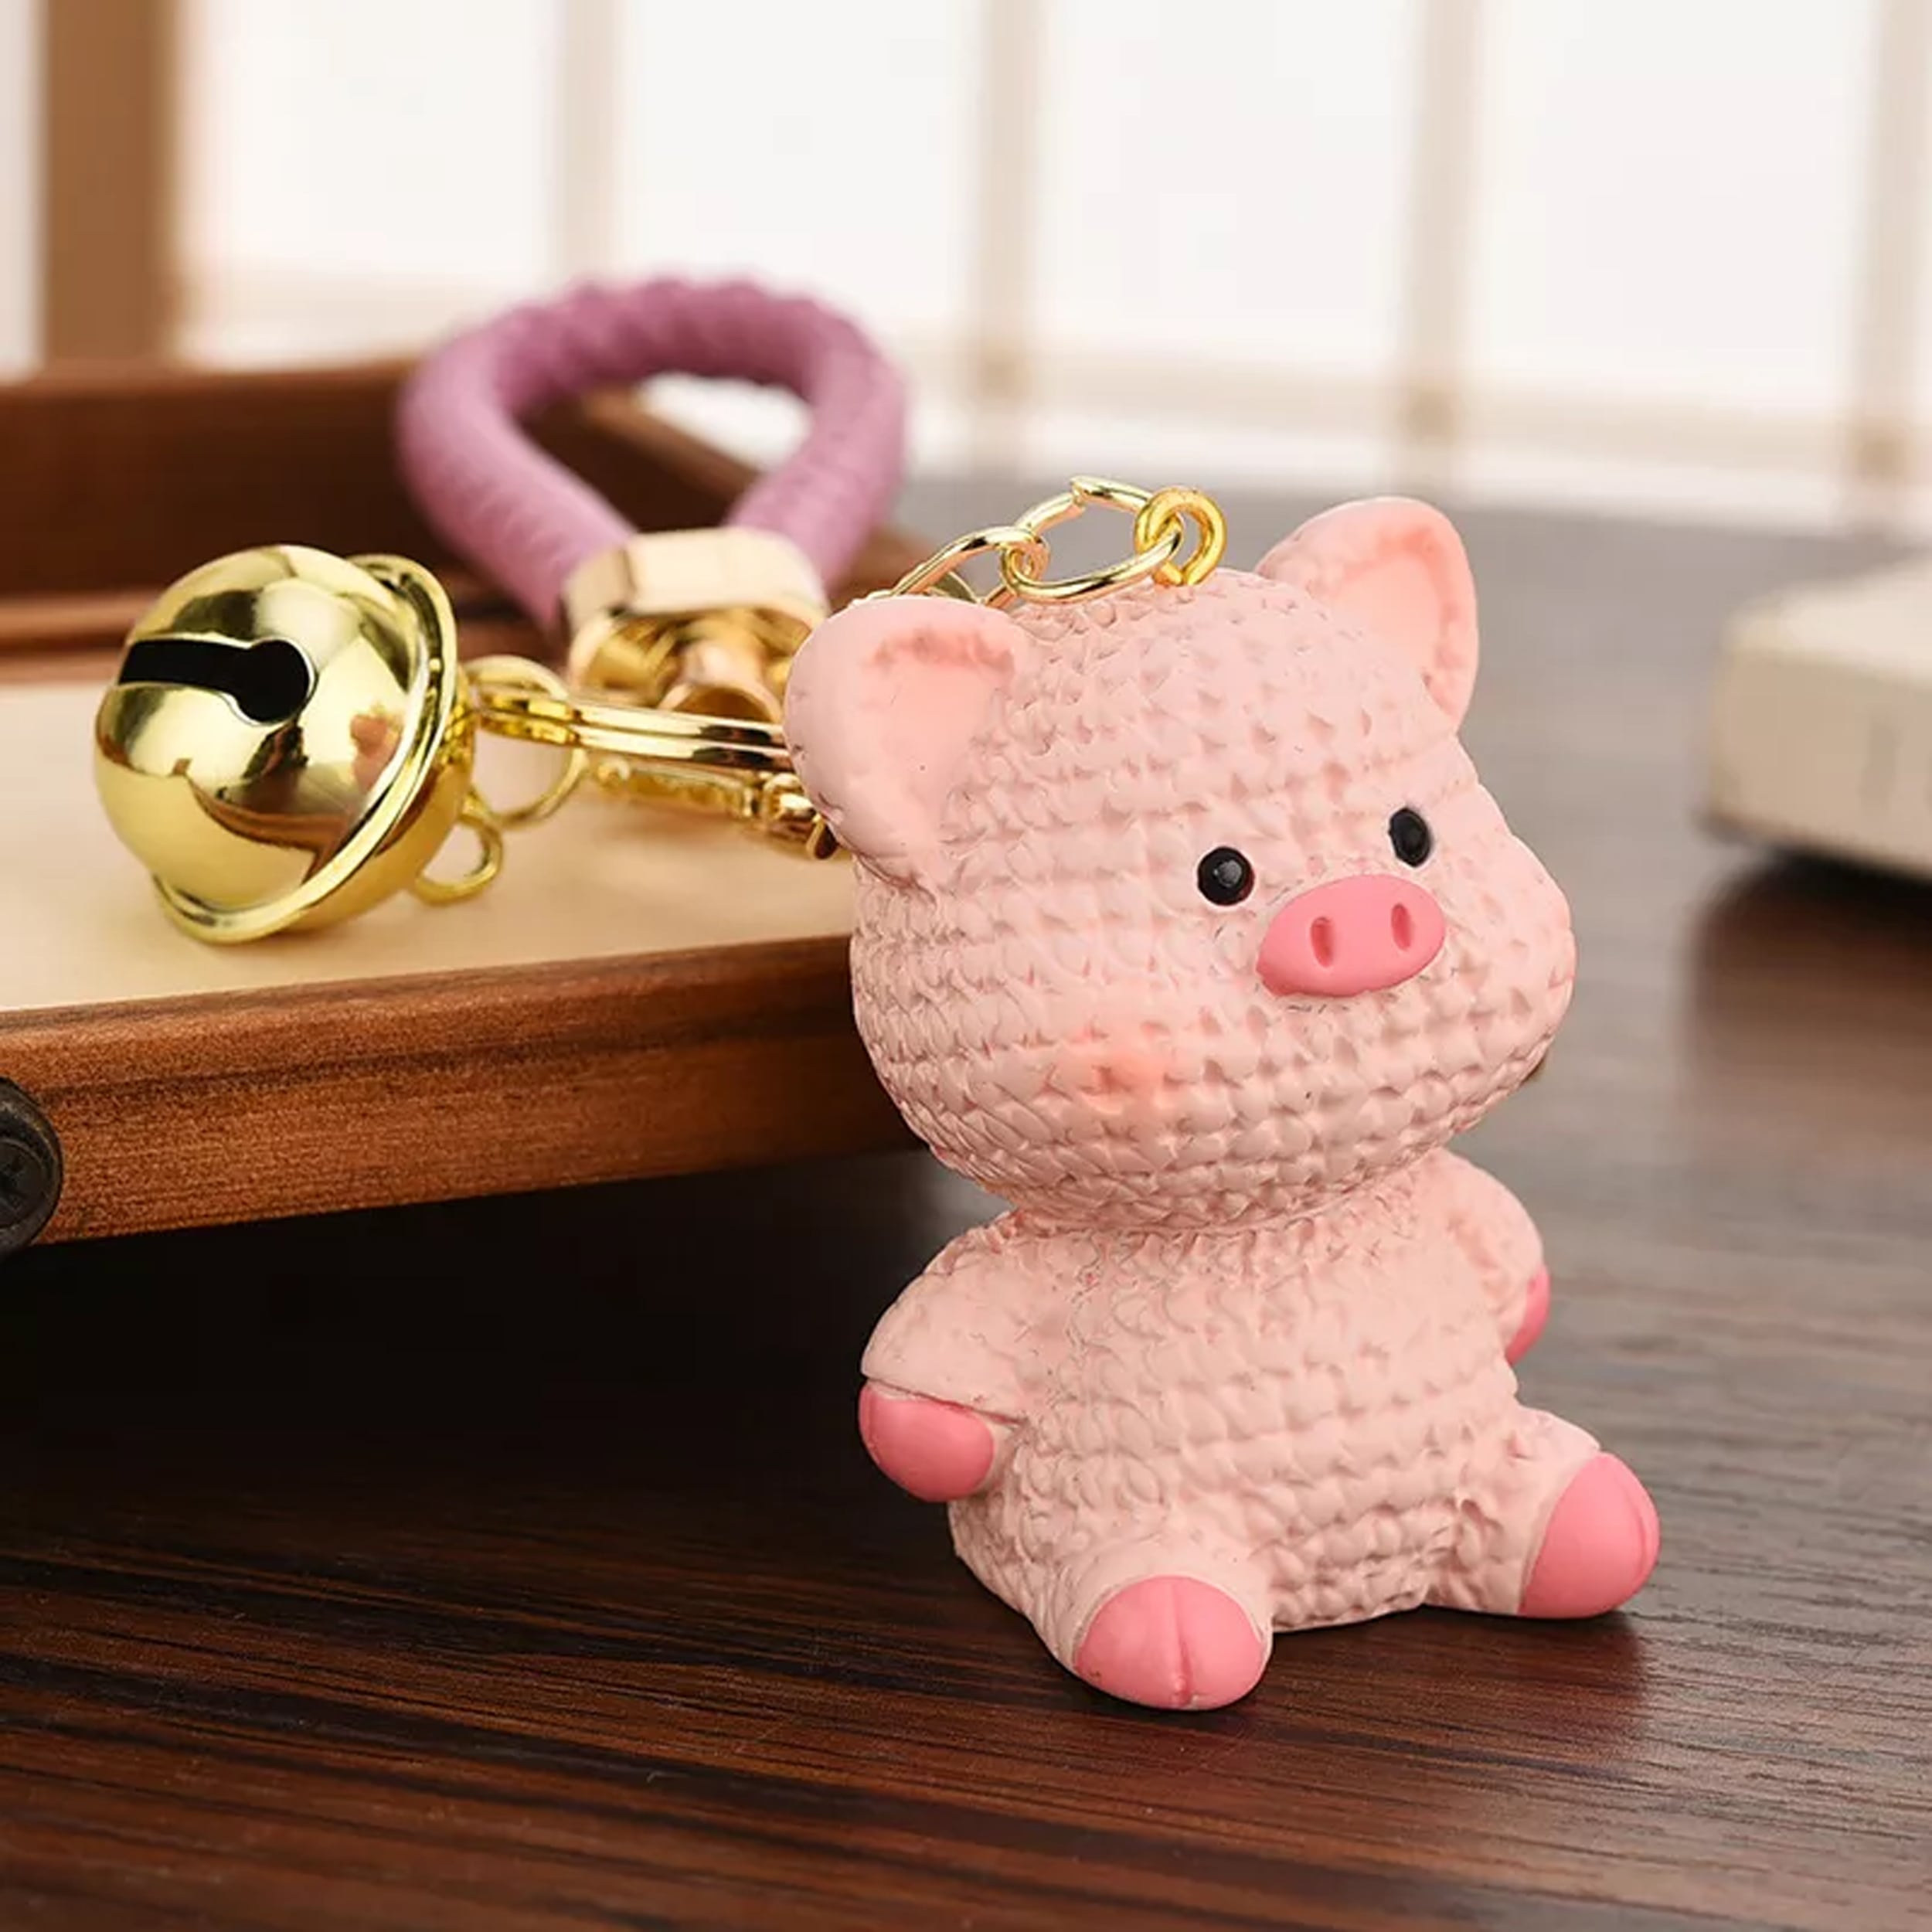 3D Shaped Animals Keychains